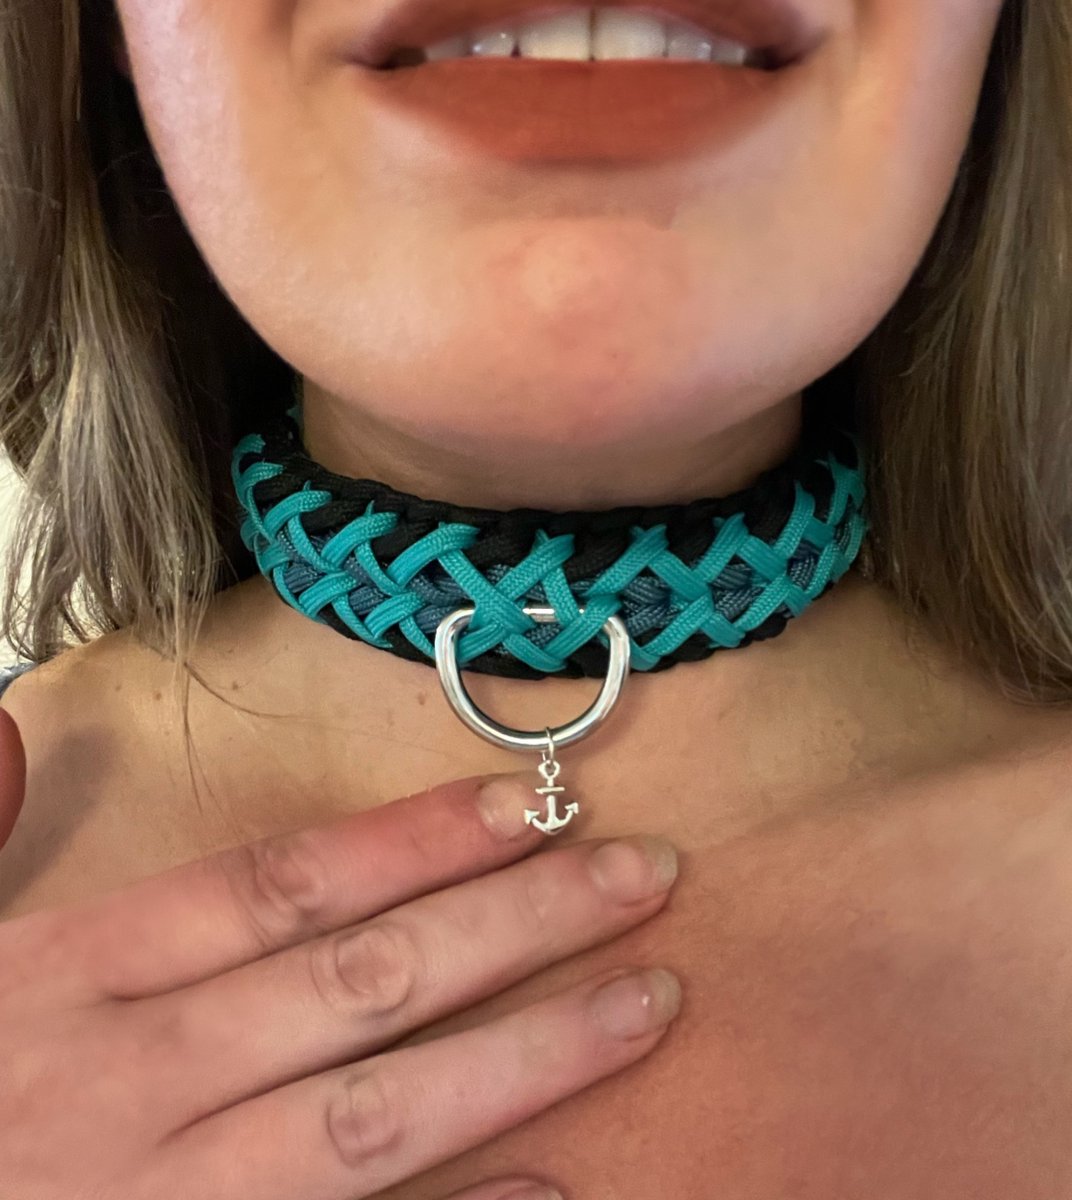 NEW PRODUCT!! Introducing our new paracord collars. Custom made in your choice of colour and optional charm. Complete with D ring and slide release clasp. Vegan friendly and made to measure